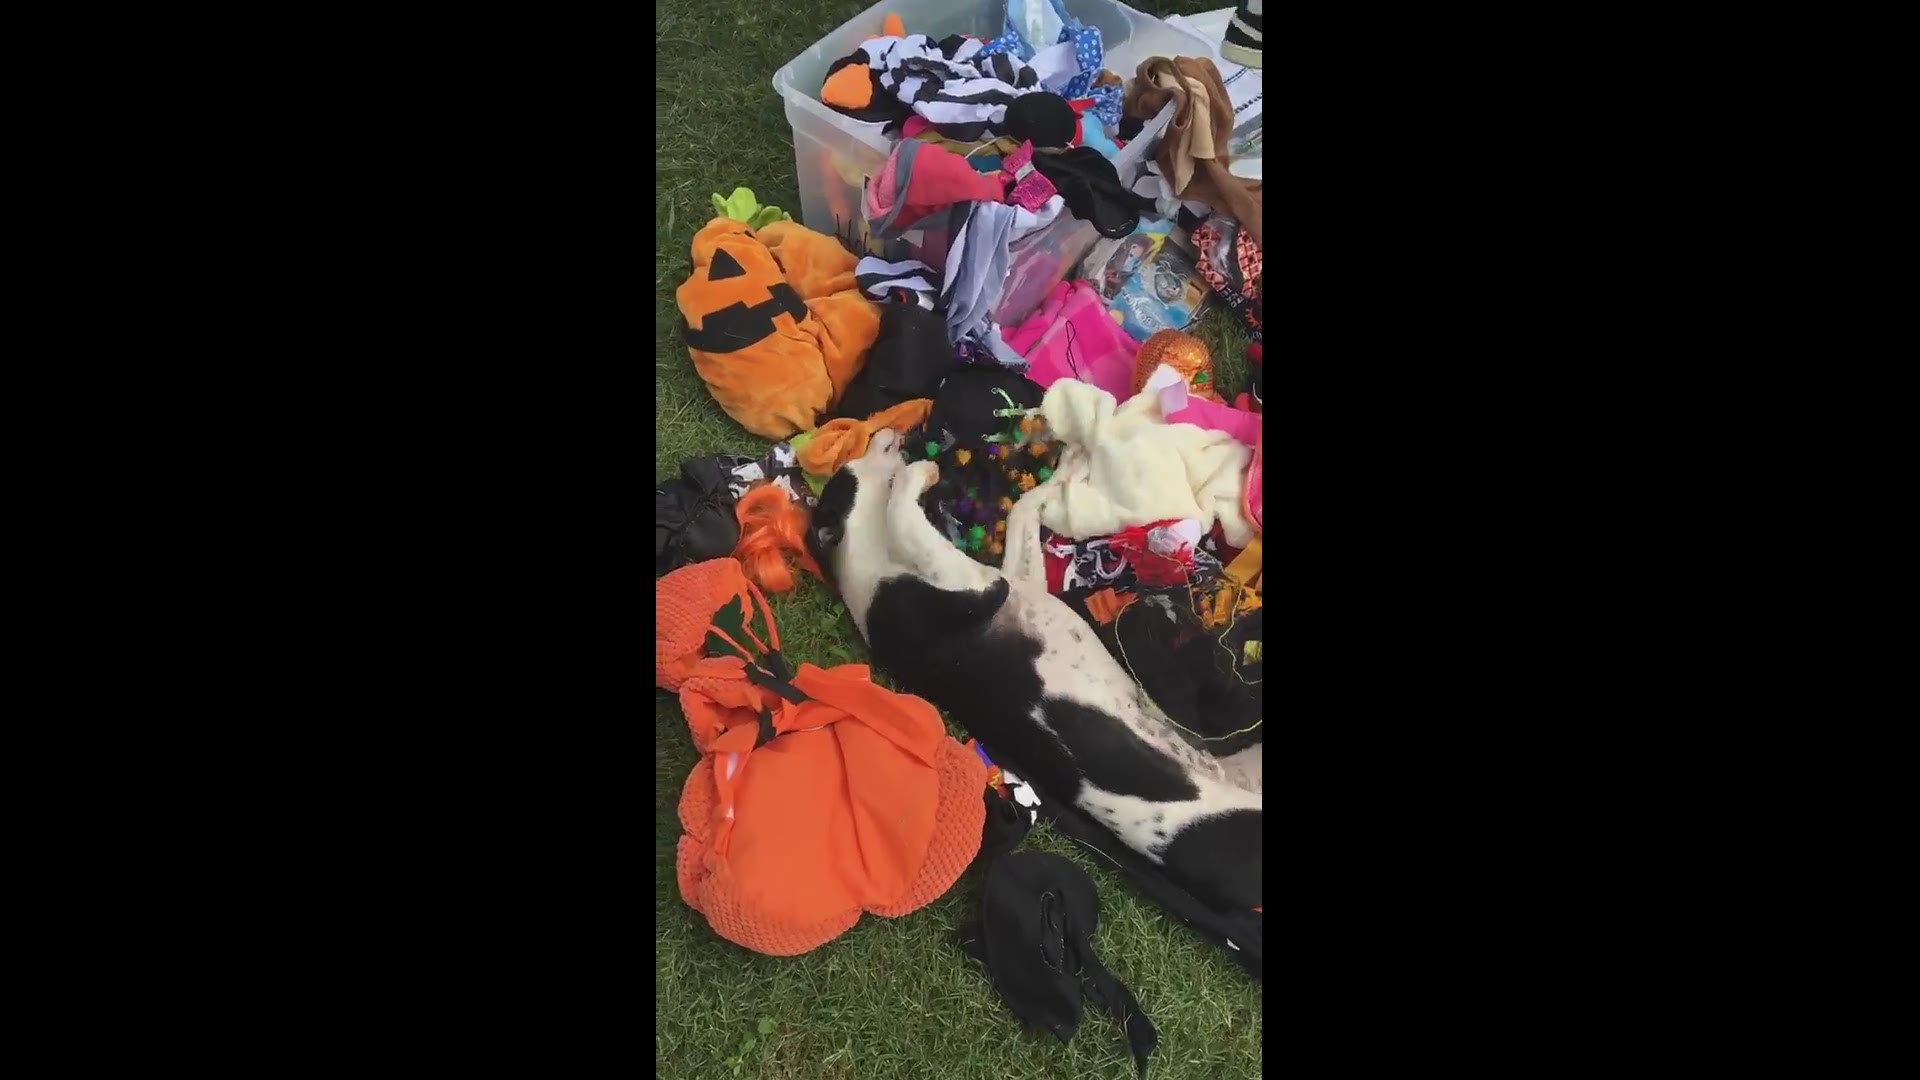 The Bastrop County Animal Shelter is hoping a $20 adoption special, and a festive fall video, will help them find homes for many animals in need.